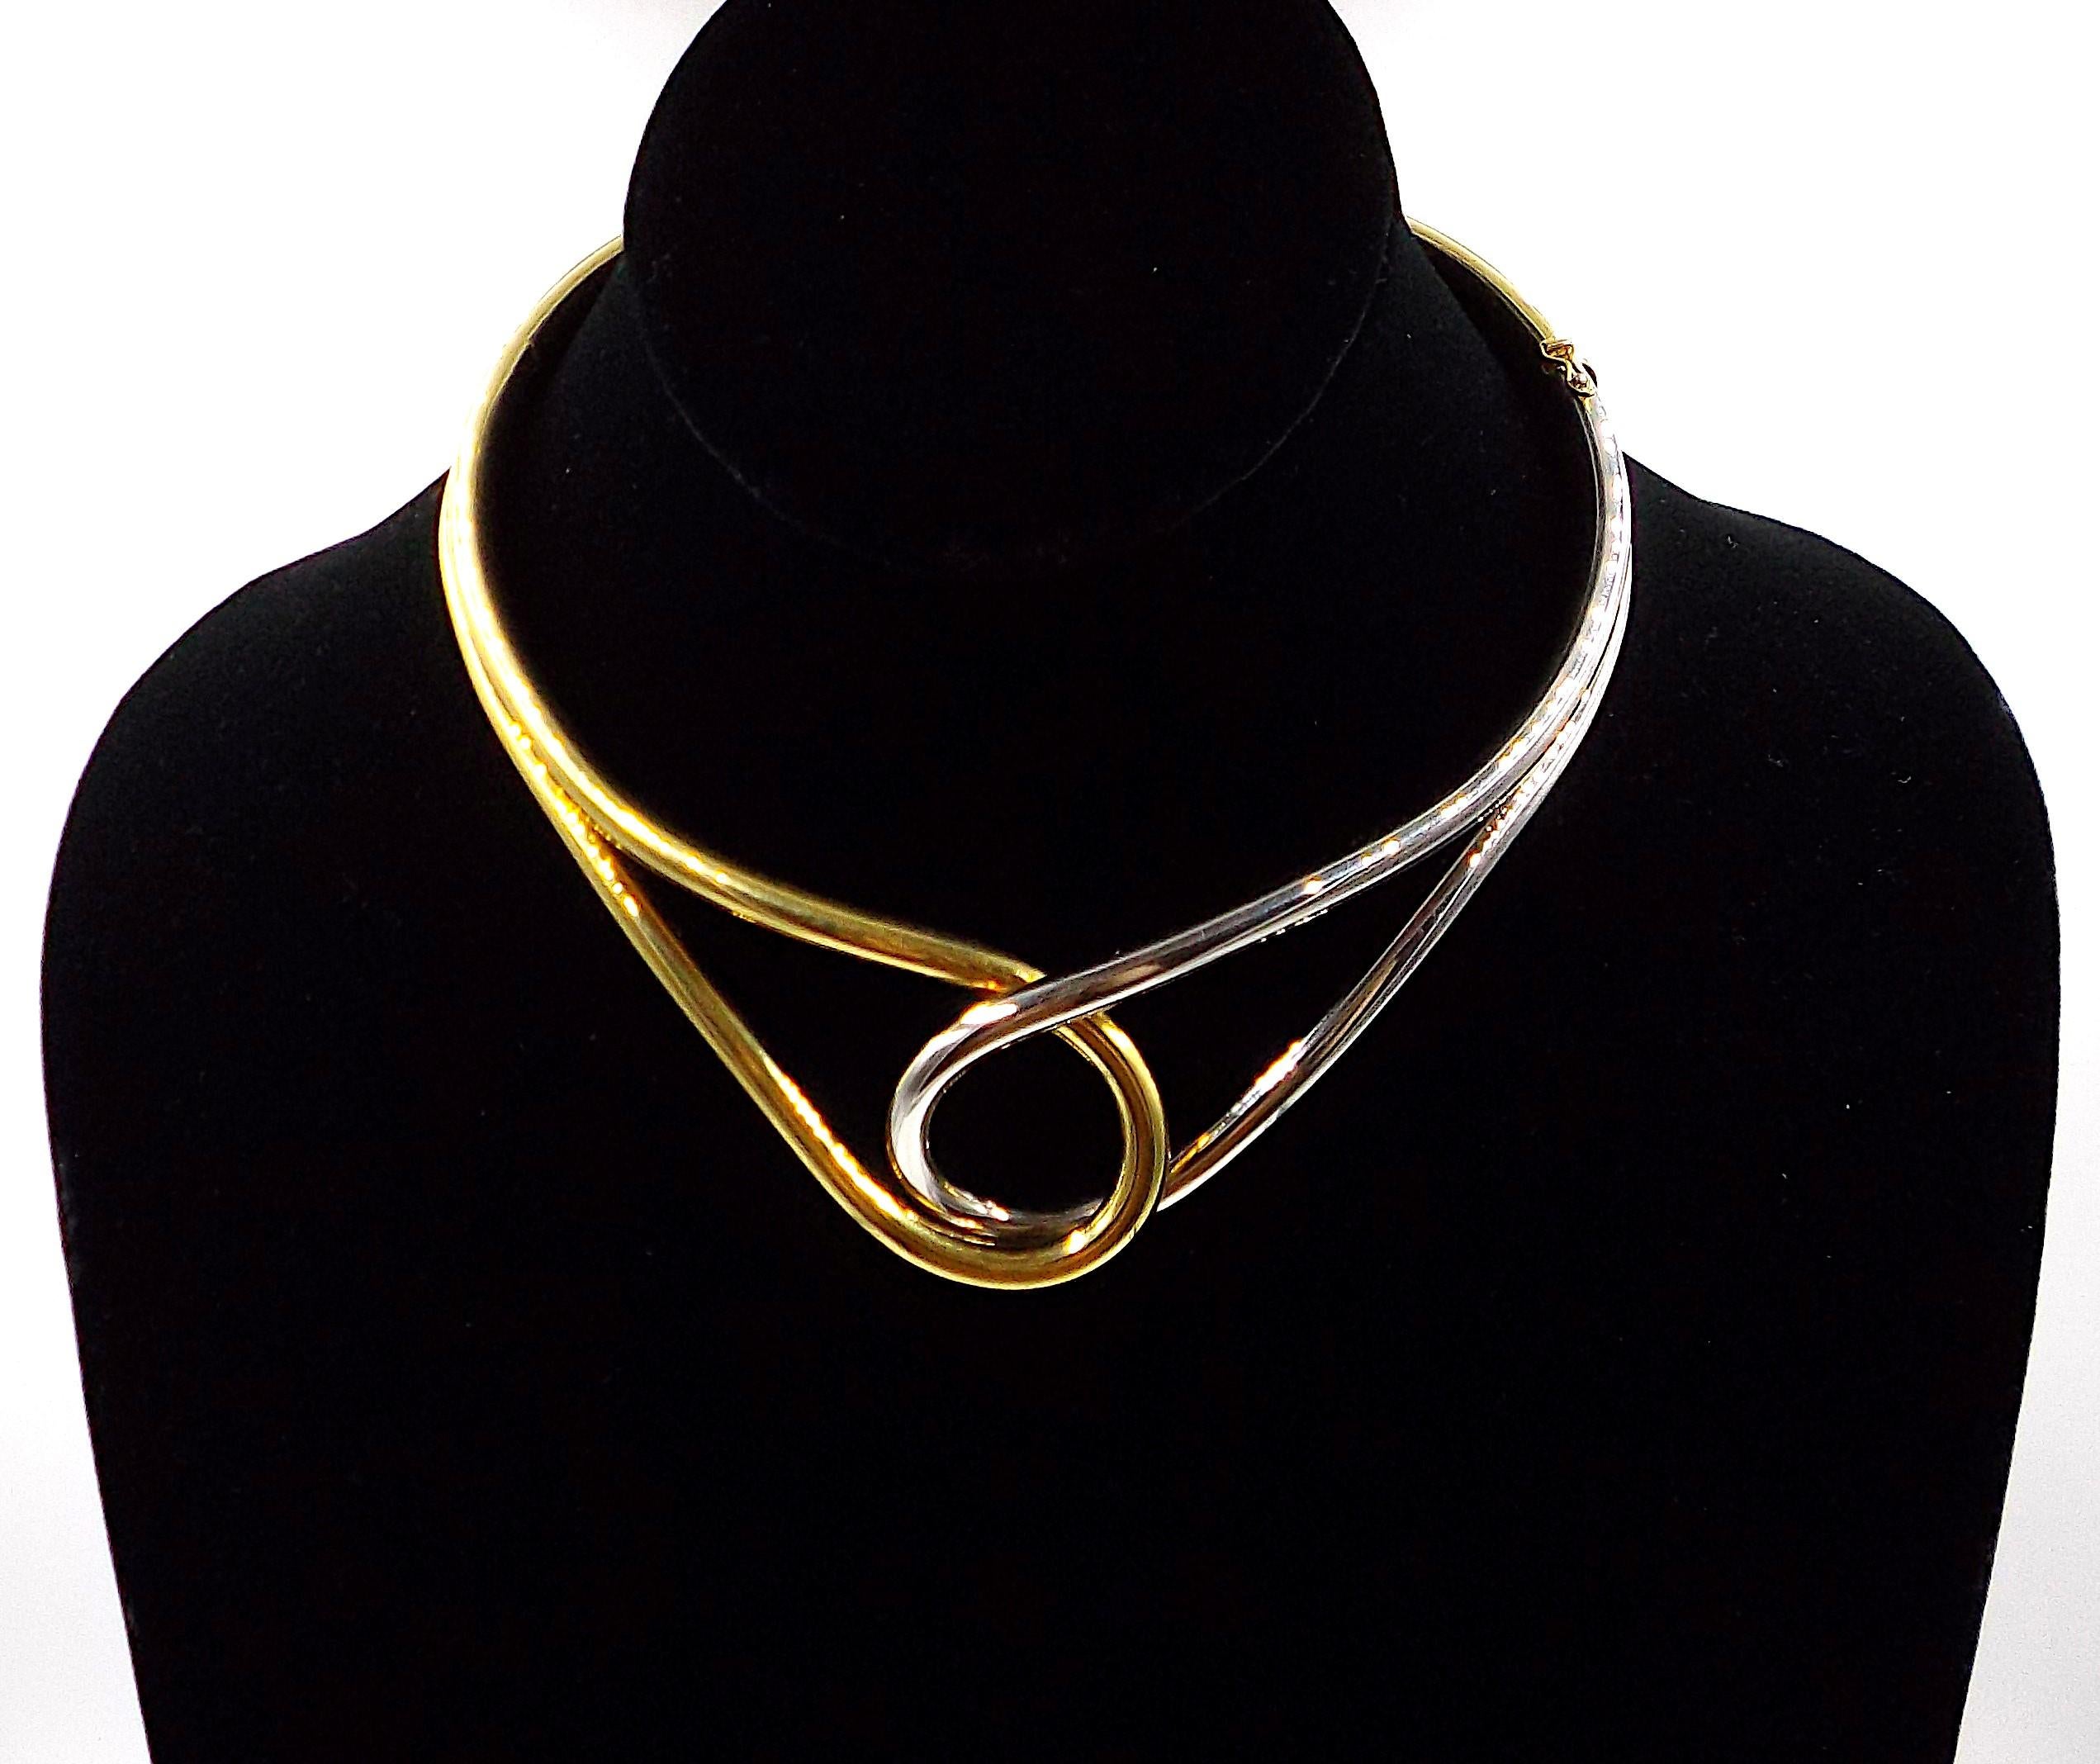 Designed as a polished yellow and white gold loop. At widest the choker measures ap. 1 1/2 inches, inside measurement is ap. 14 inches, weight is ap. 83.1 grams. Stamped 750, IOMI.